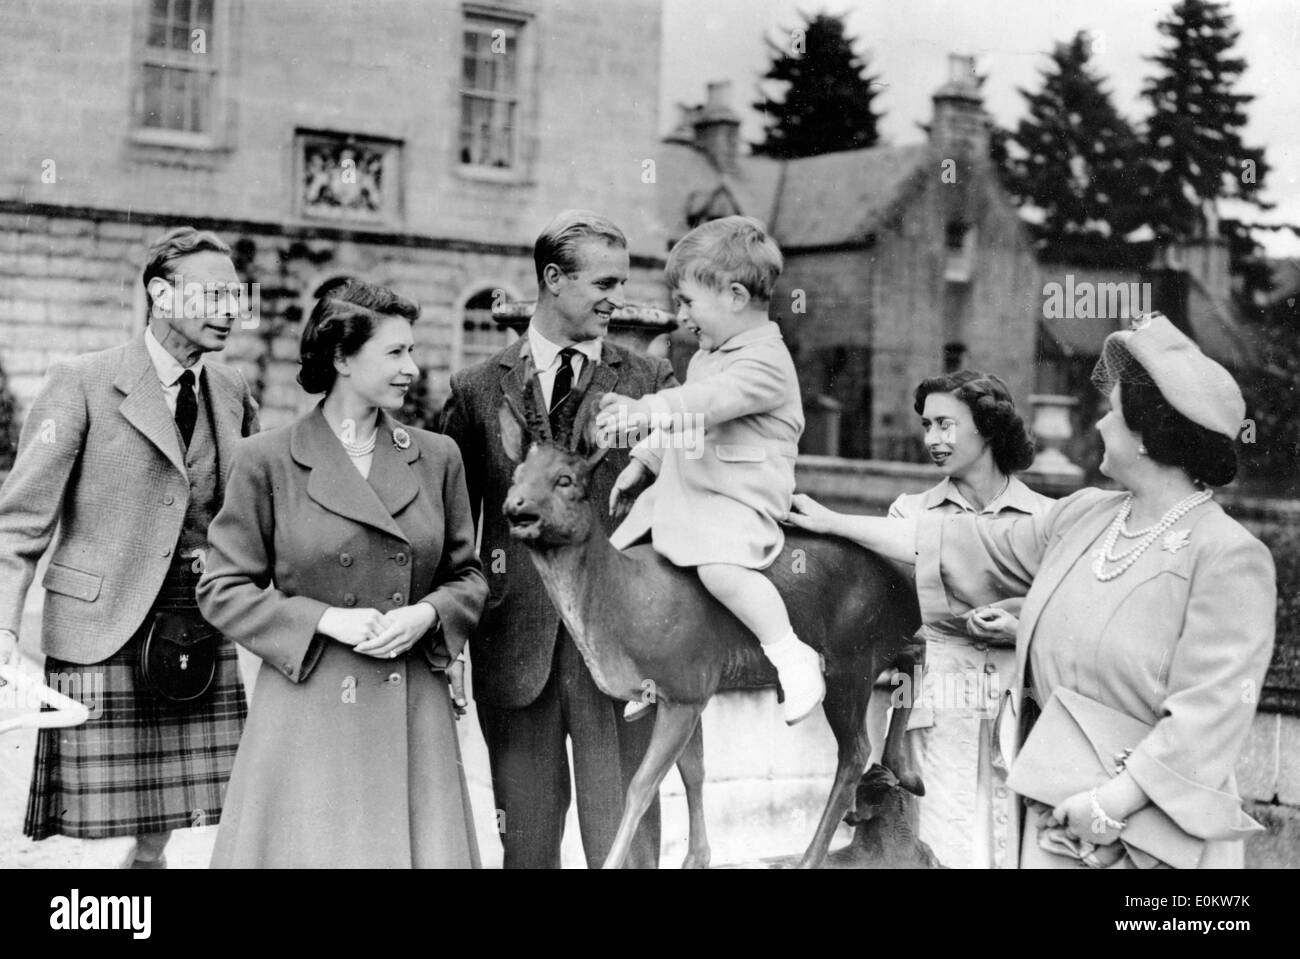 Member of the Windsor royal family gathered around a young Prince Charles sitting on a deer Stock Photo